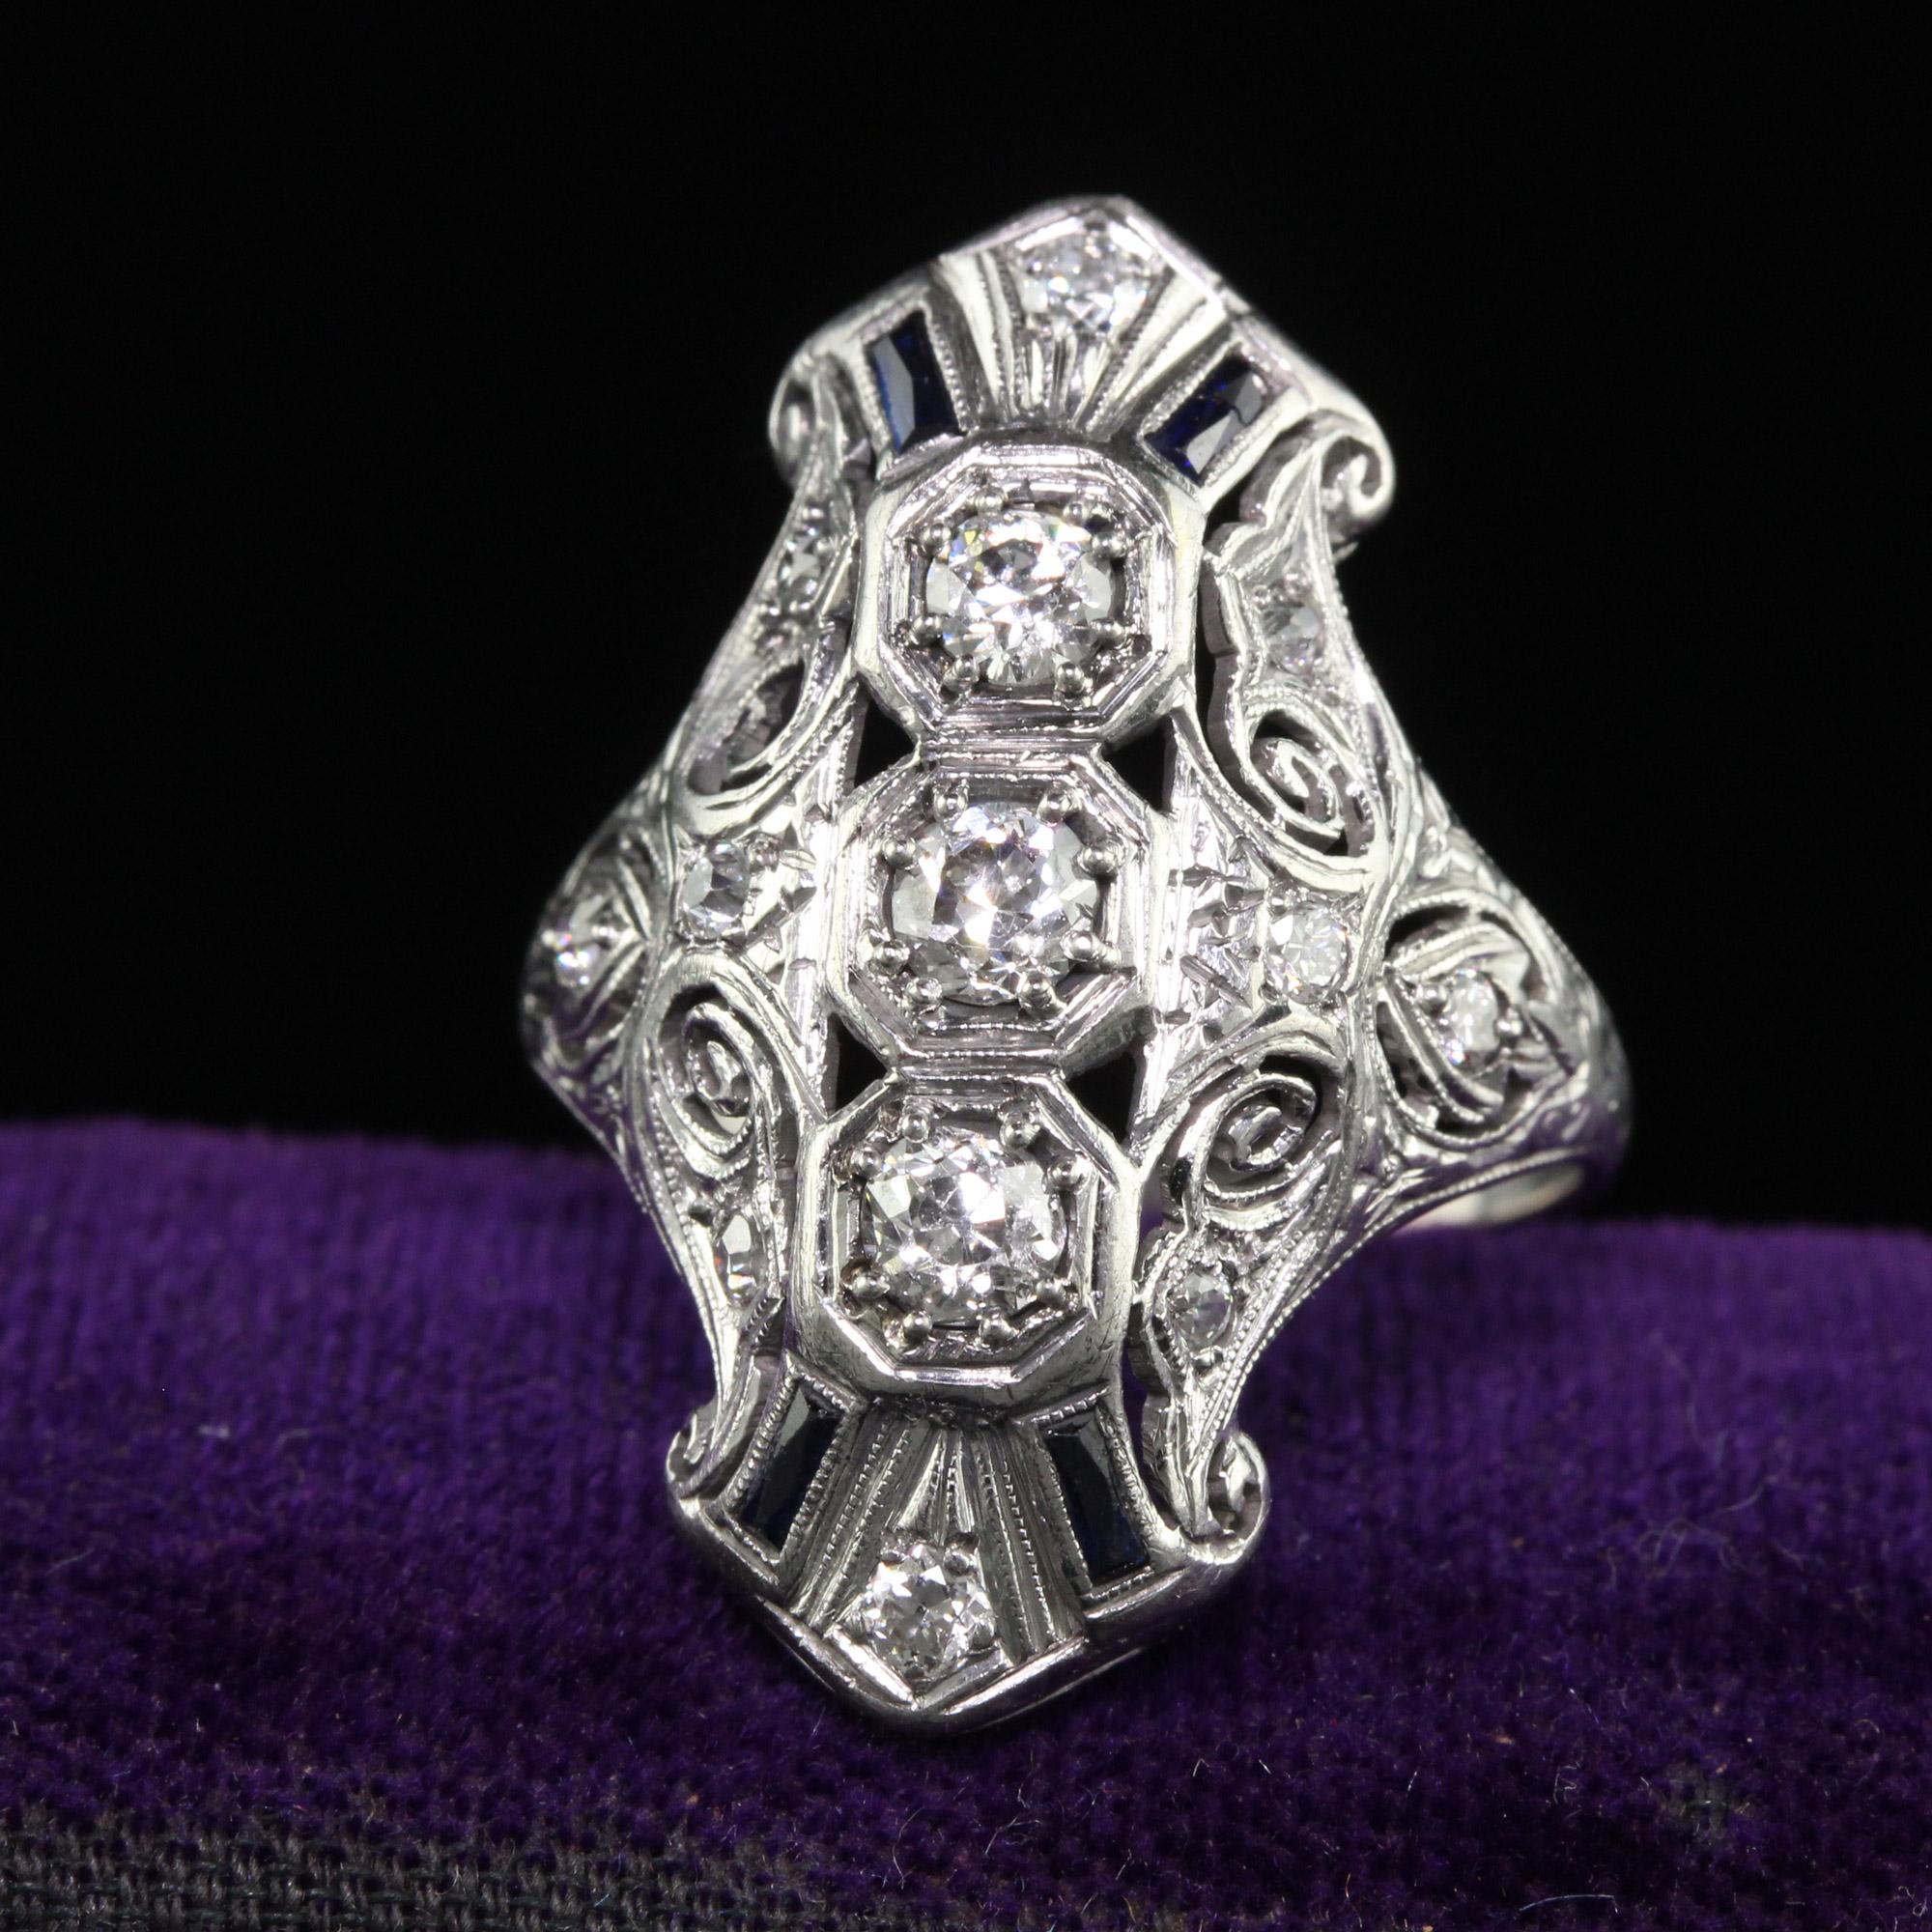 Beautiful Antique Art Deco Platinum Old Euro Diamond and Sapphire Shield Ring. This beautiful shield ring is crafted in platinum. There are old european cut diamonds and French cut sapphires set in a gorgeous filigree mounting. The ring is in good